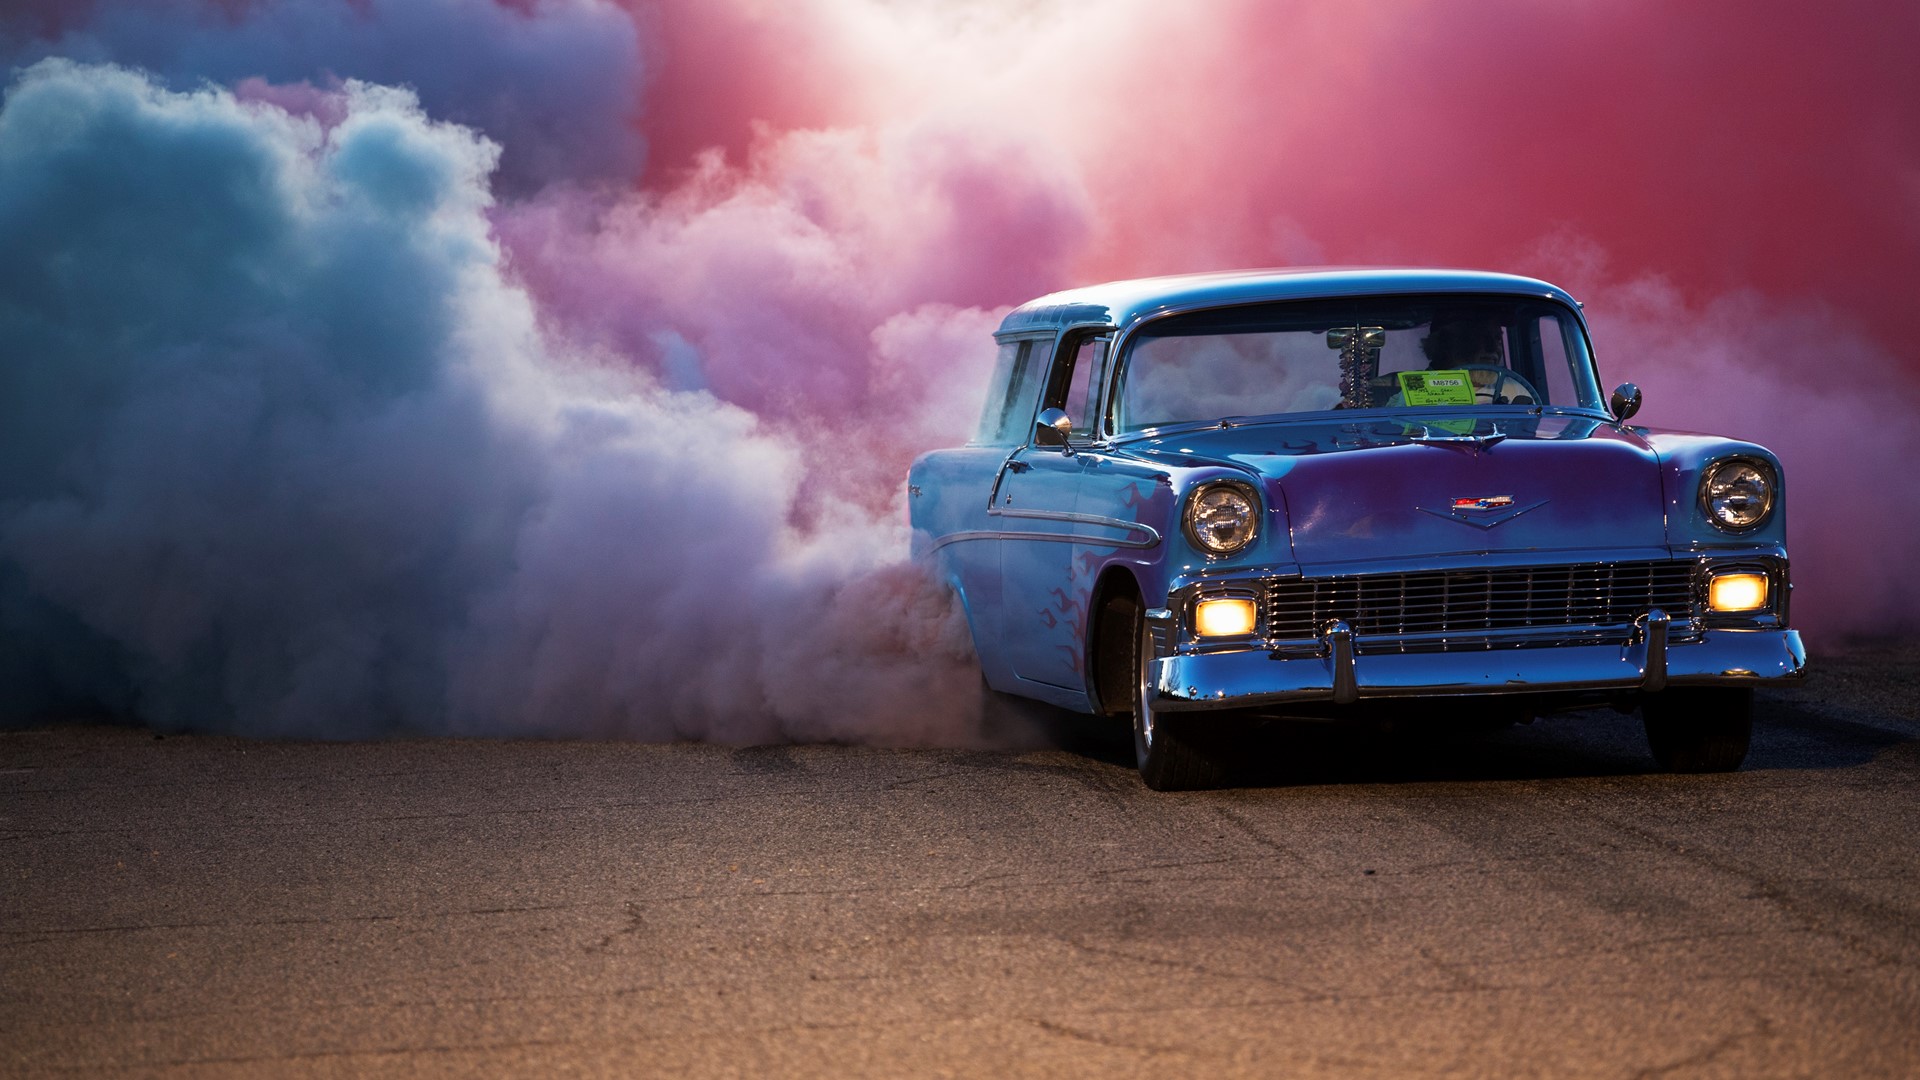 Reg Bennion sends up clouds of red and blue smoke from the tires of his 1956 Chevrolet Nomad